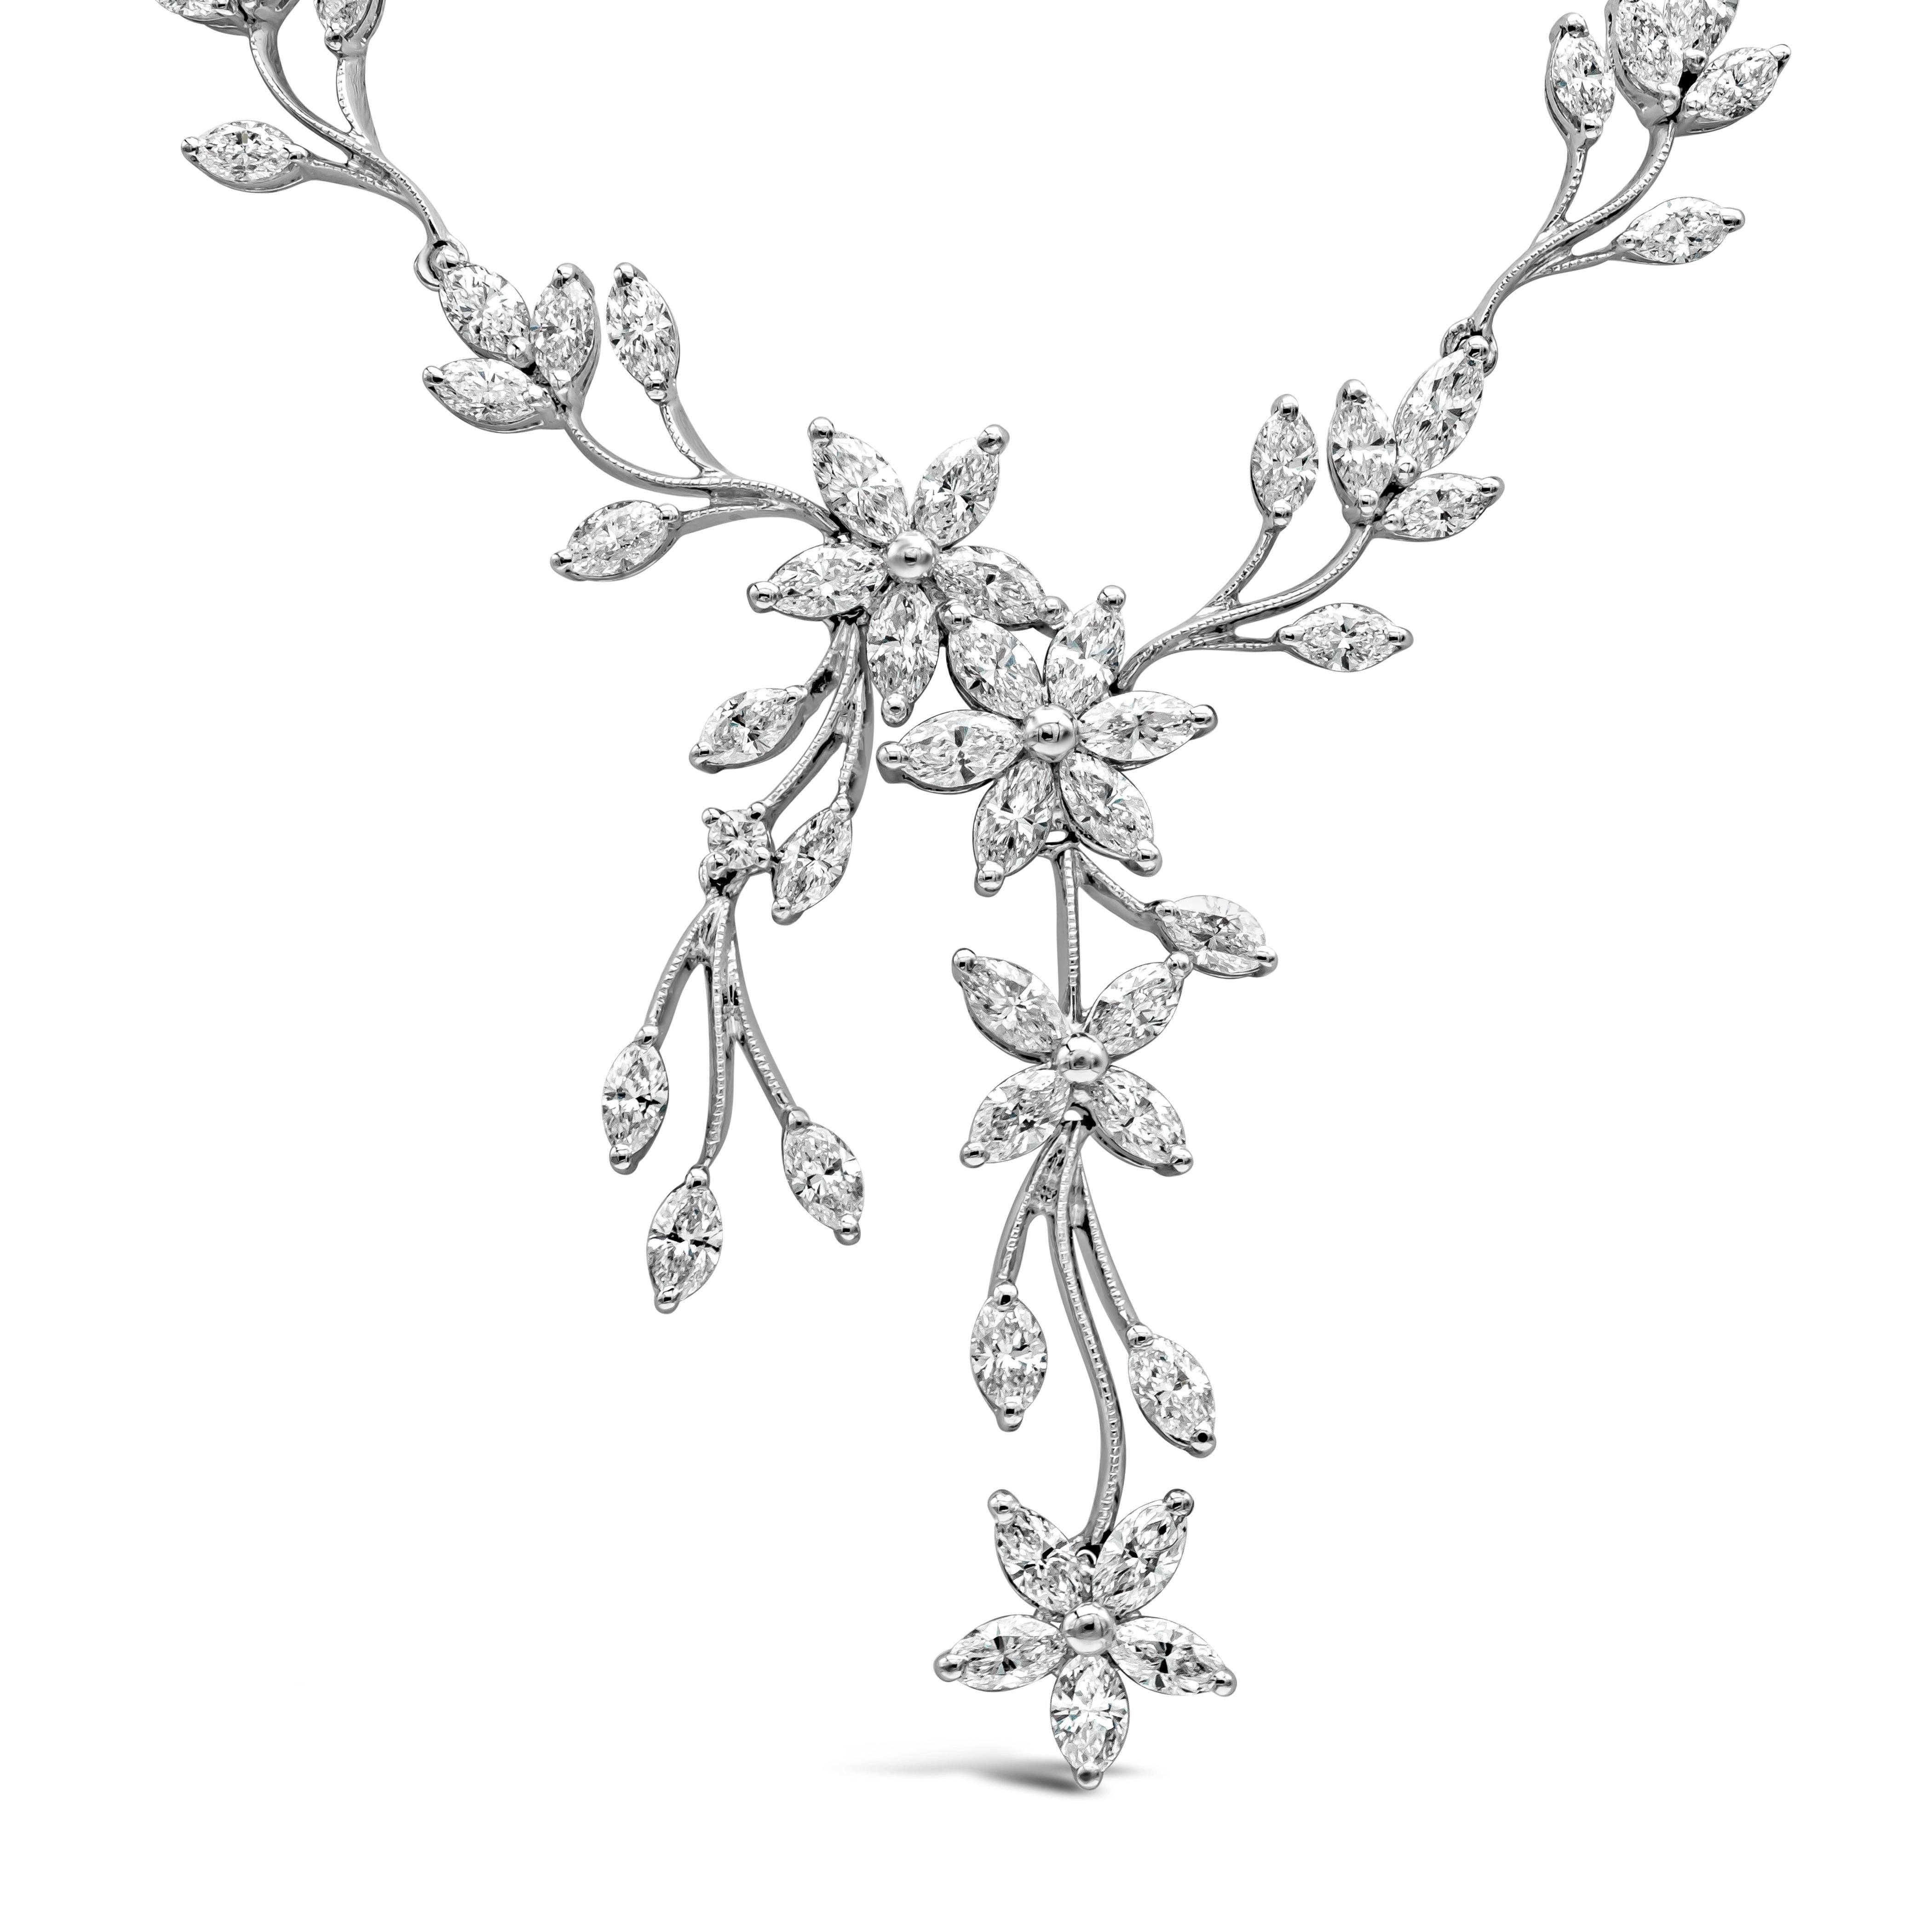 A chic and fashionable drop necklace made up of 69 marquise cut diamonds arranged in the shape of a flower-motif design. Diamonds weigh approximately 7.03 carats total, G color and SI1 clarity. Set in 18K white gold and 16 inches in length.

Style